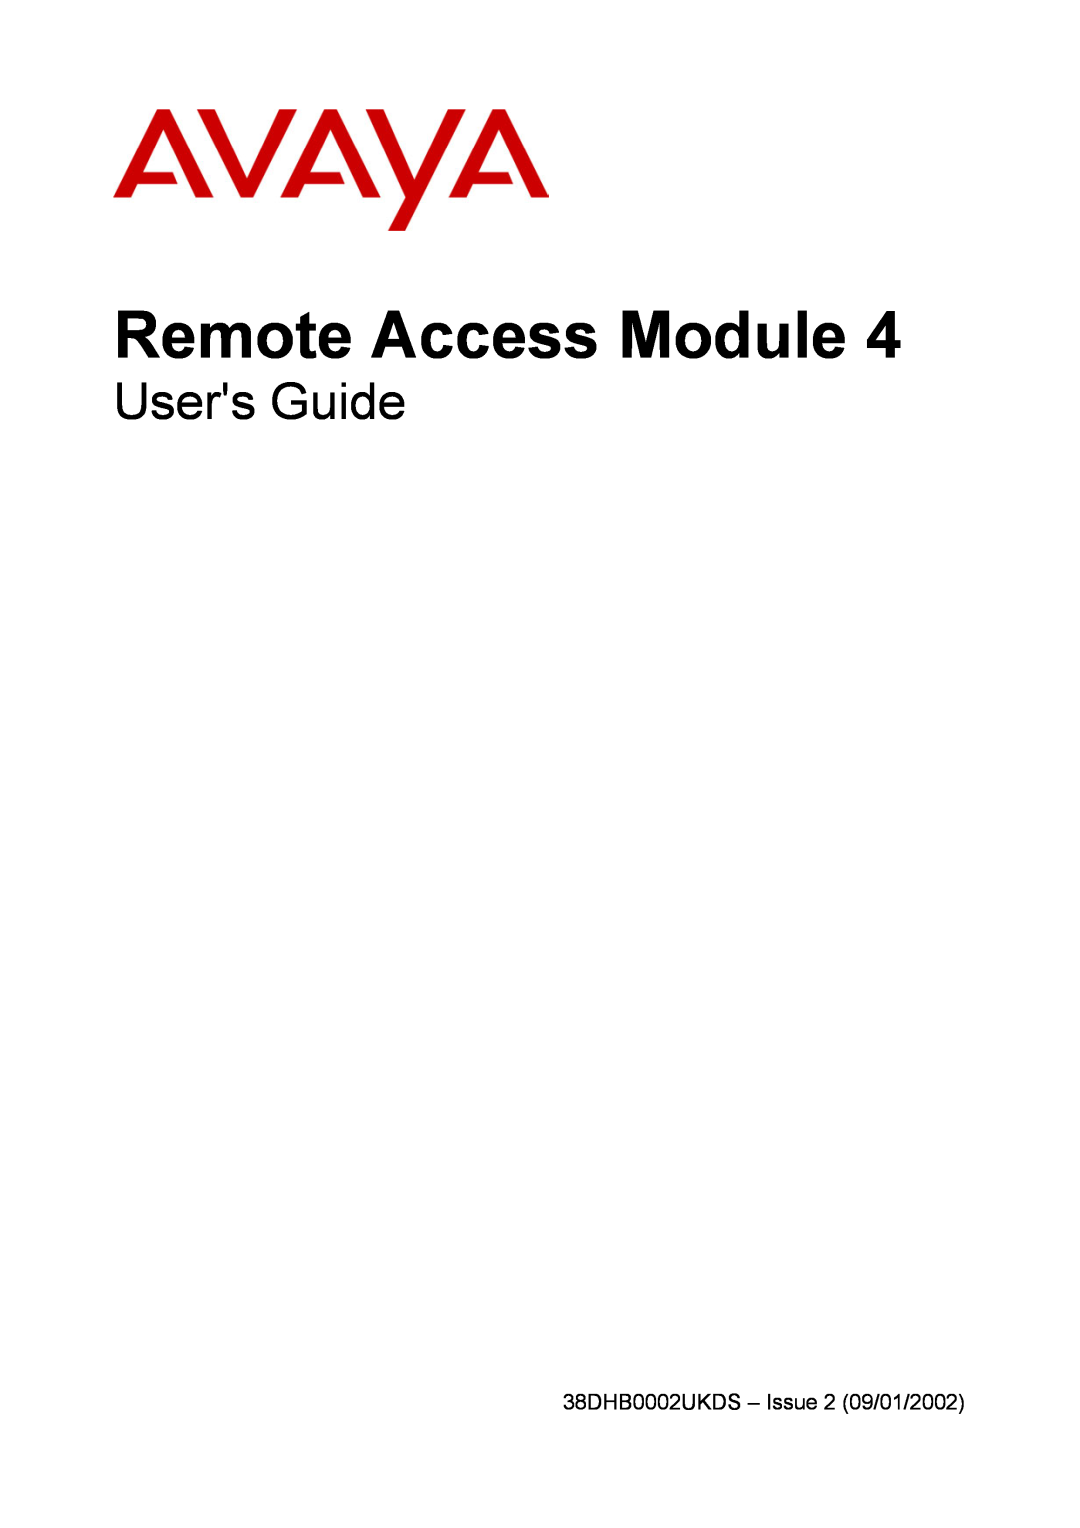 Avaya Remote Access Module 4 manual Users Guide, 38DHB0002UKDS - Issue 2 09/01/2002 